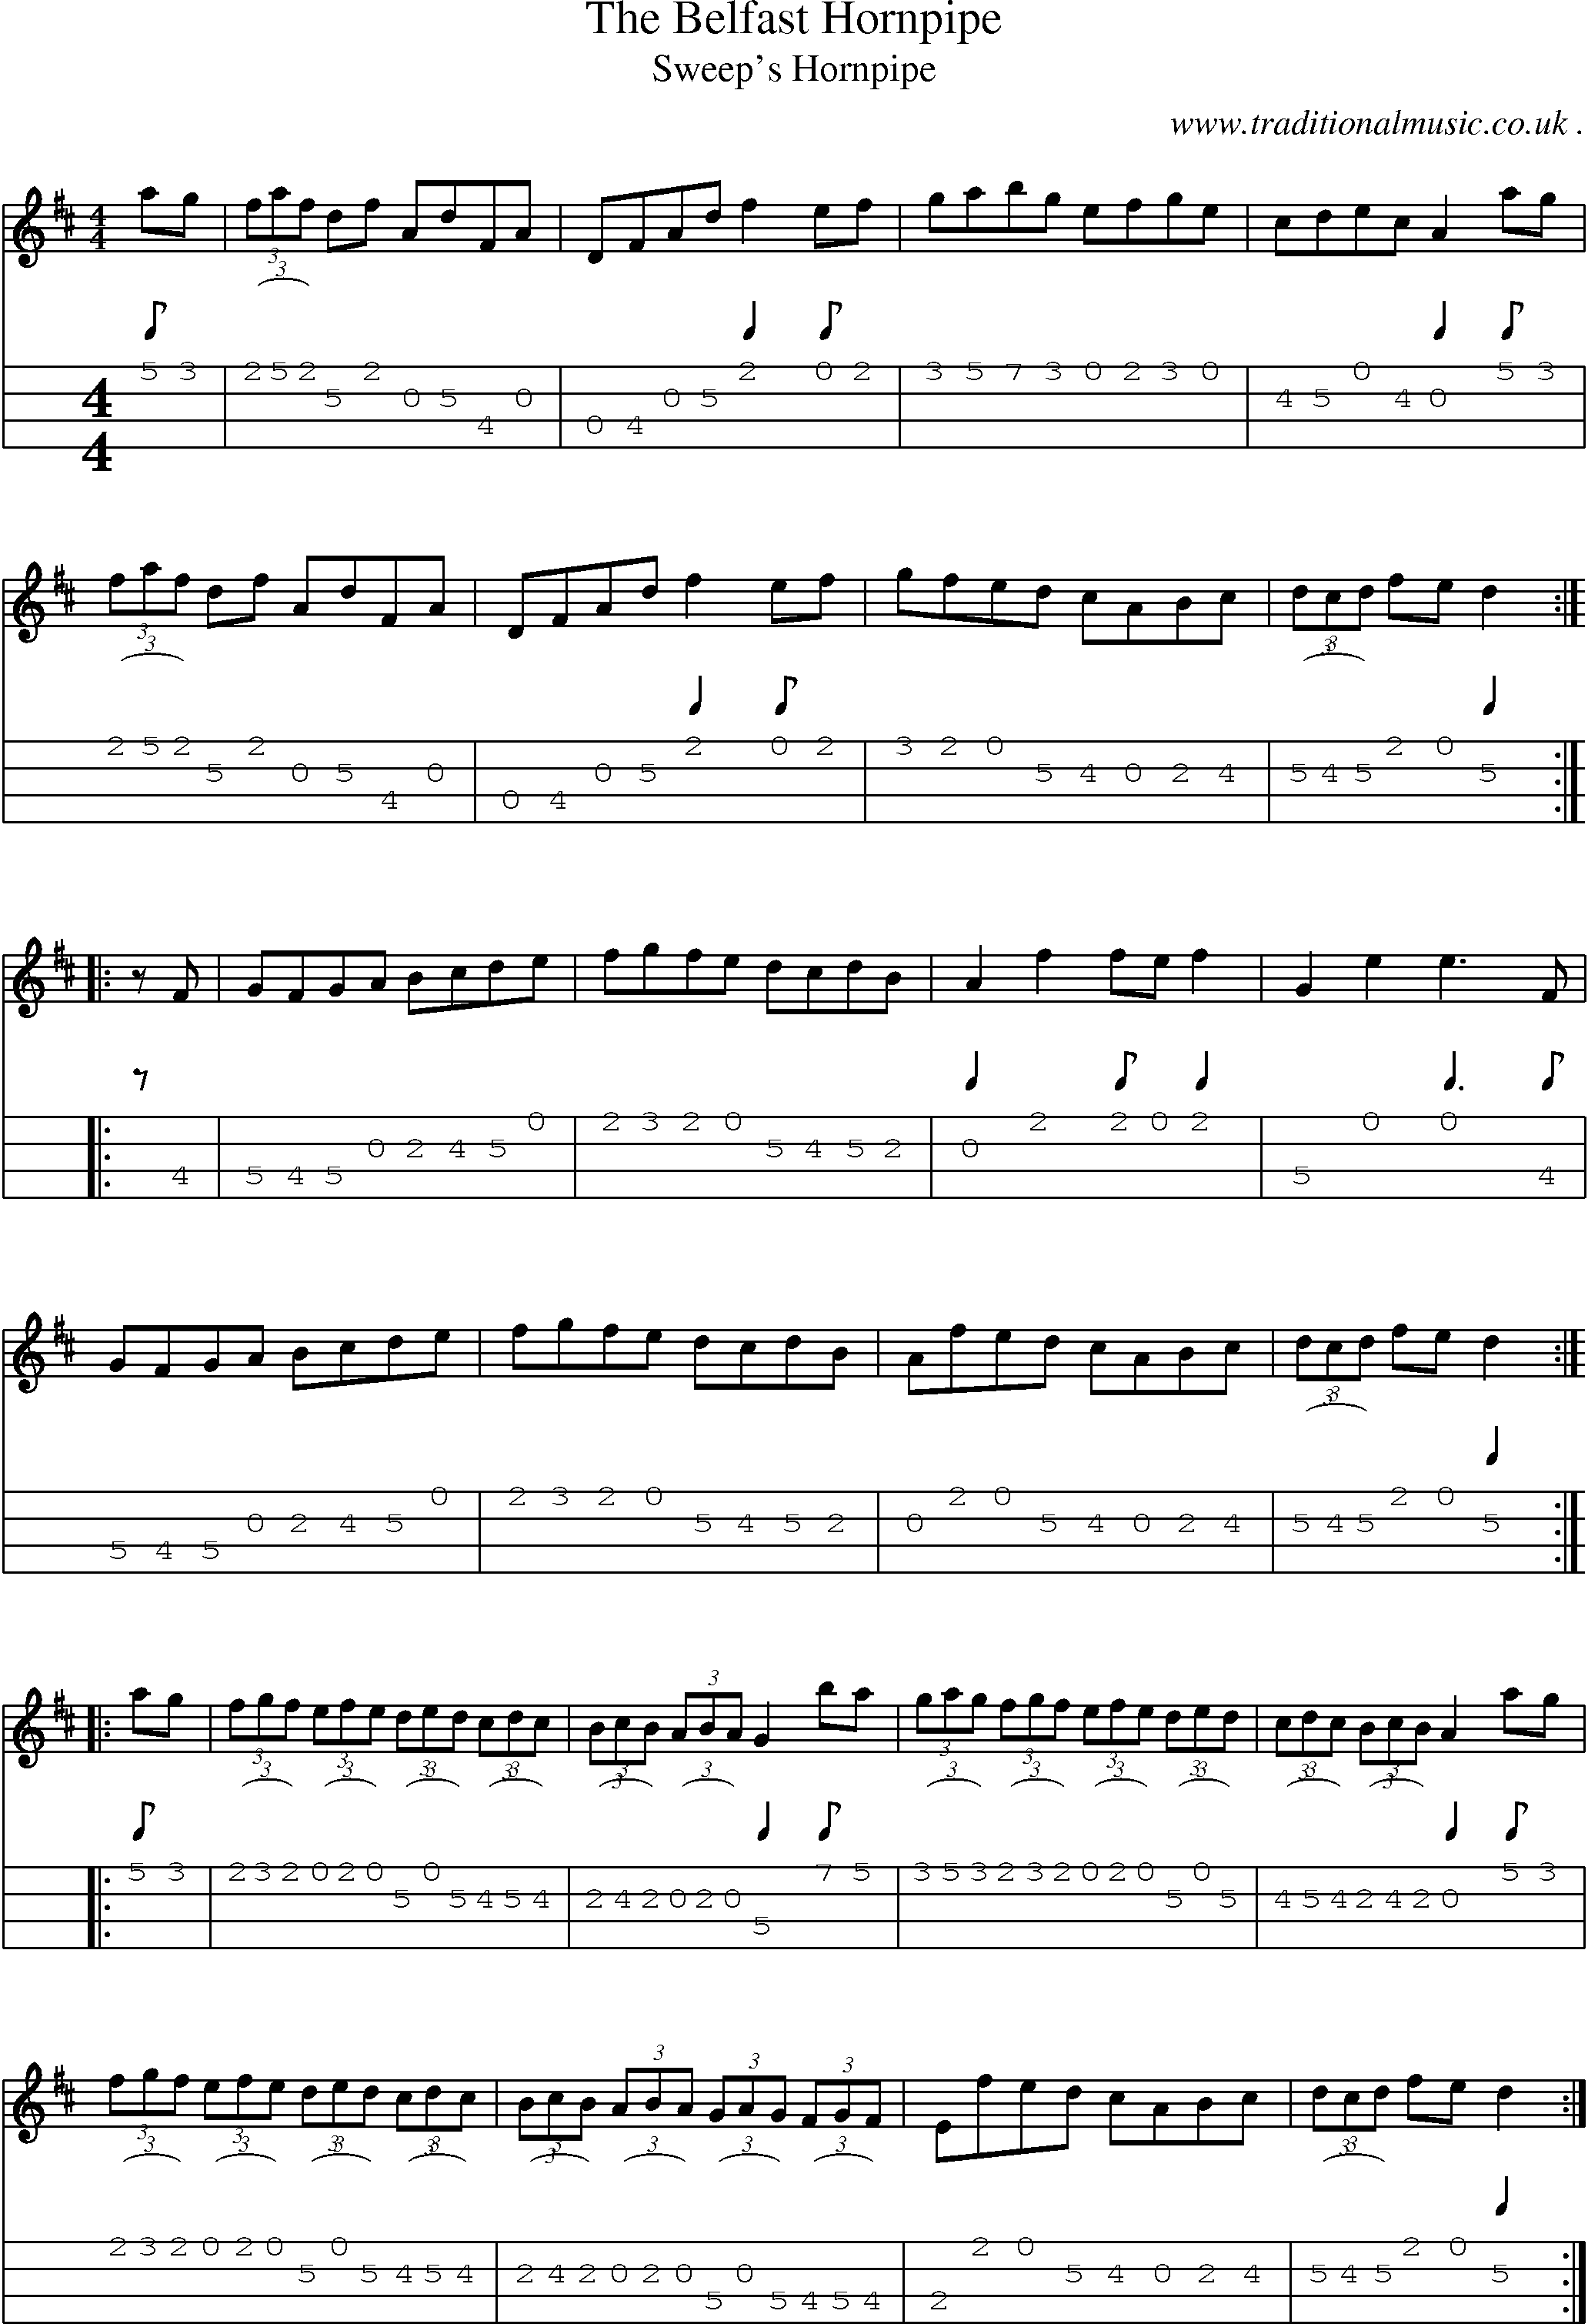 Sheet-Music and Mandolin Tabs for The Belfast Hornpipe